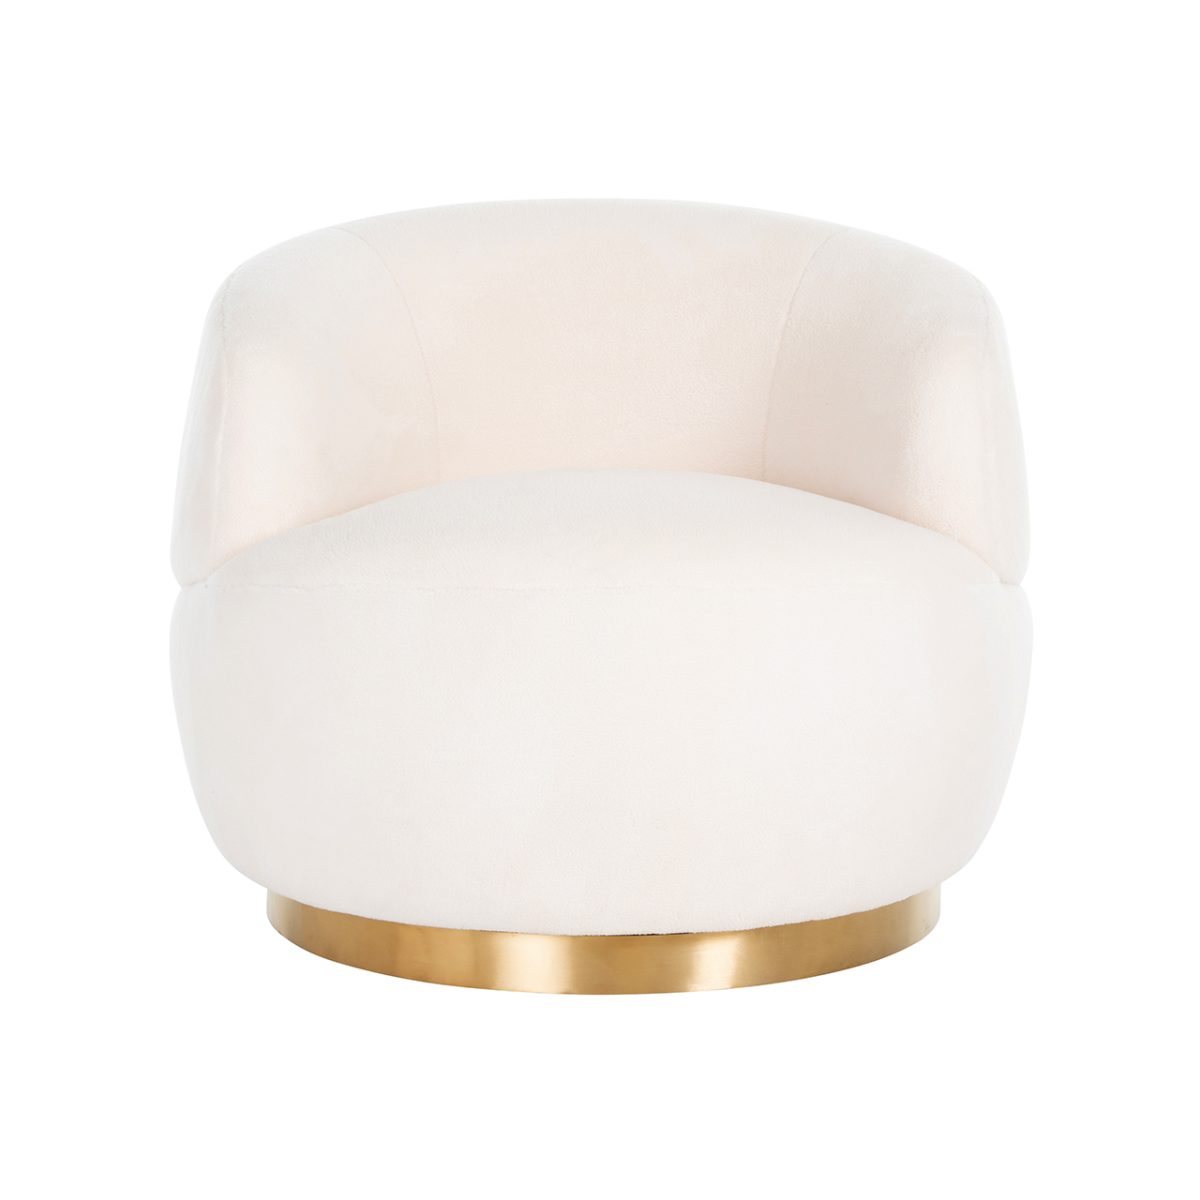 S4489 WHITE - Draaifauteuil Teddy White teddy / Brushed gold